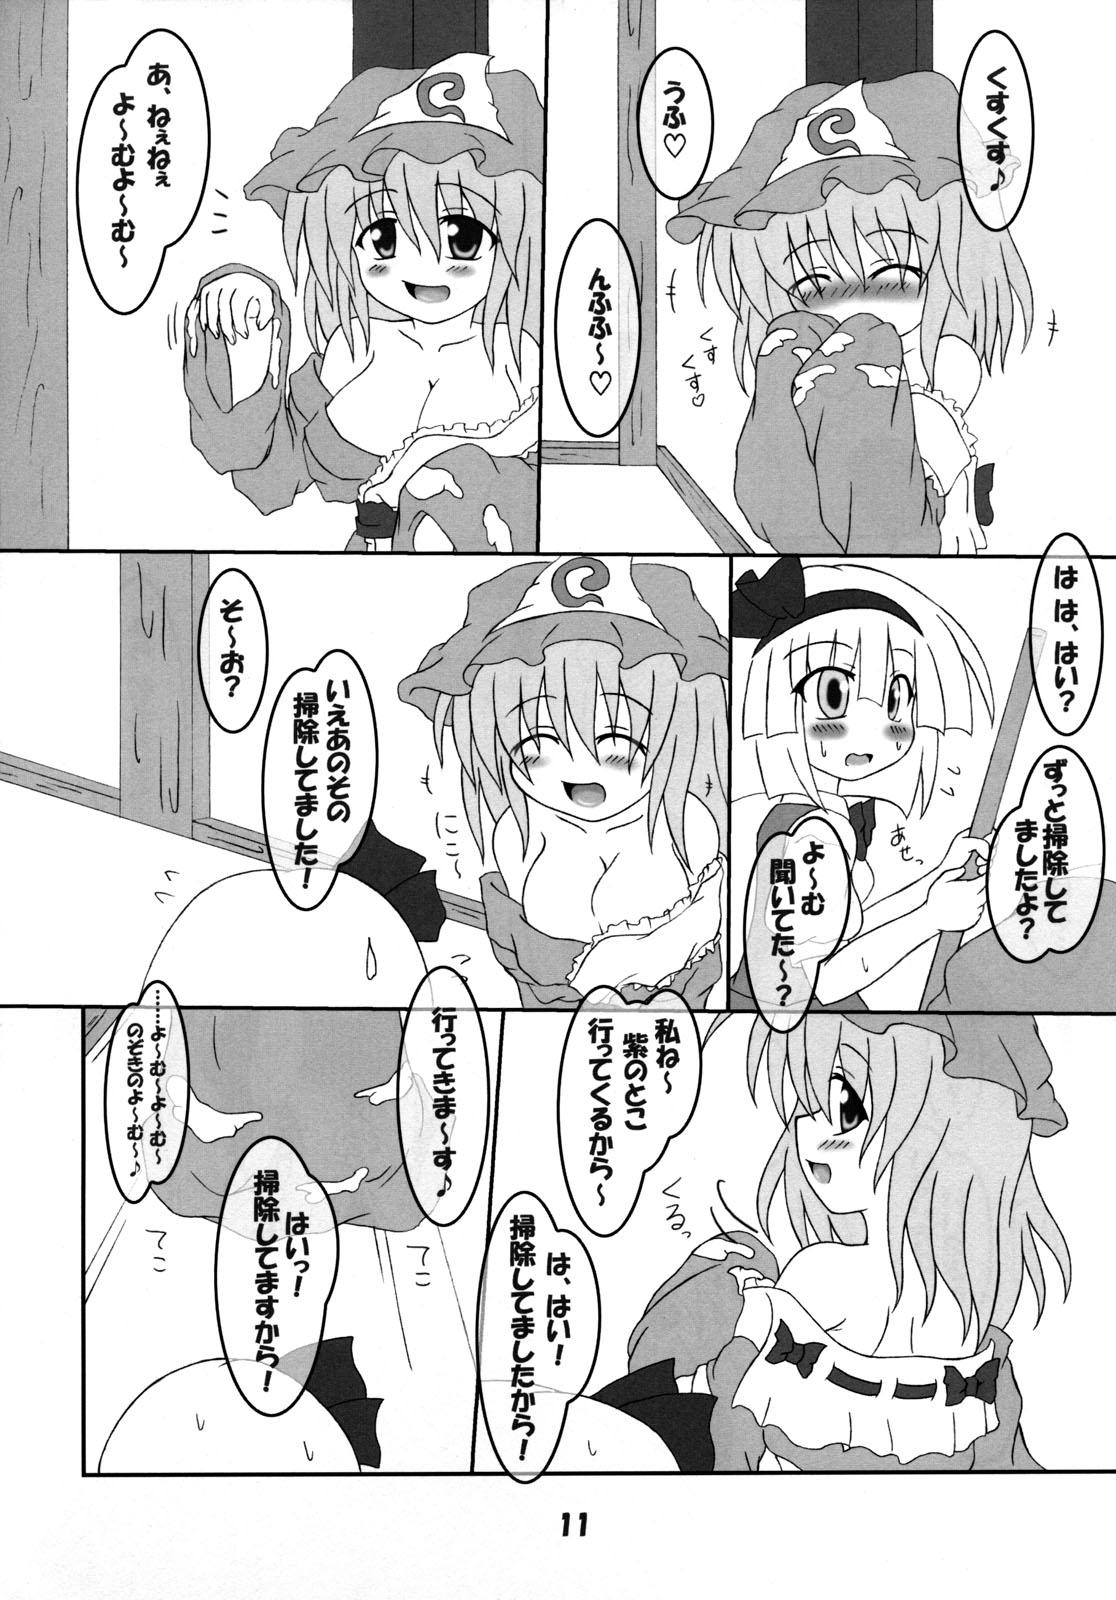 Asian Rollin 24 - Touhou project Rabo - Page 10